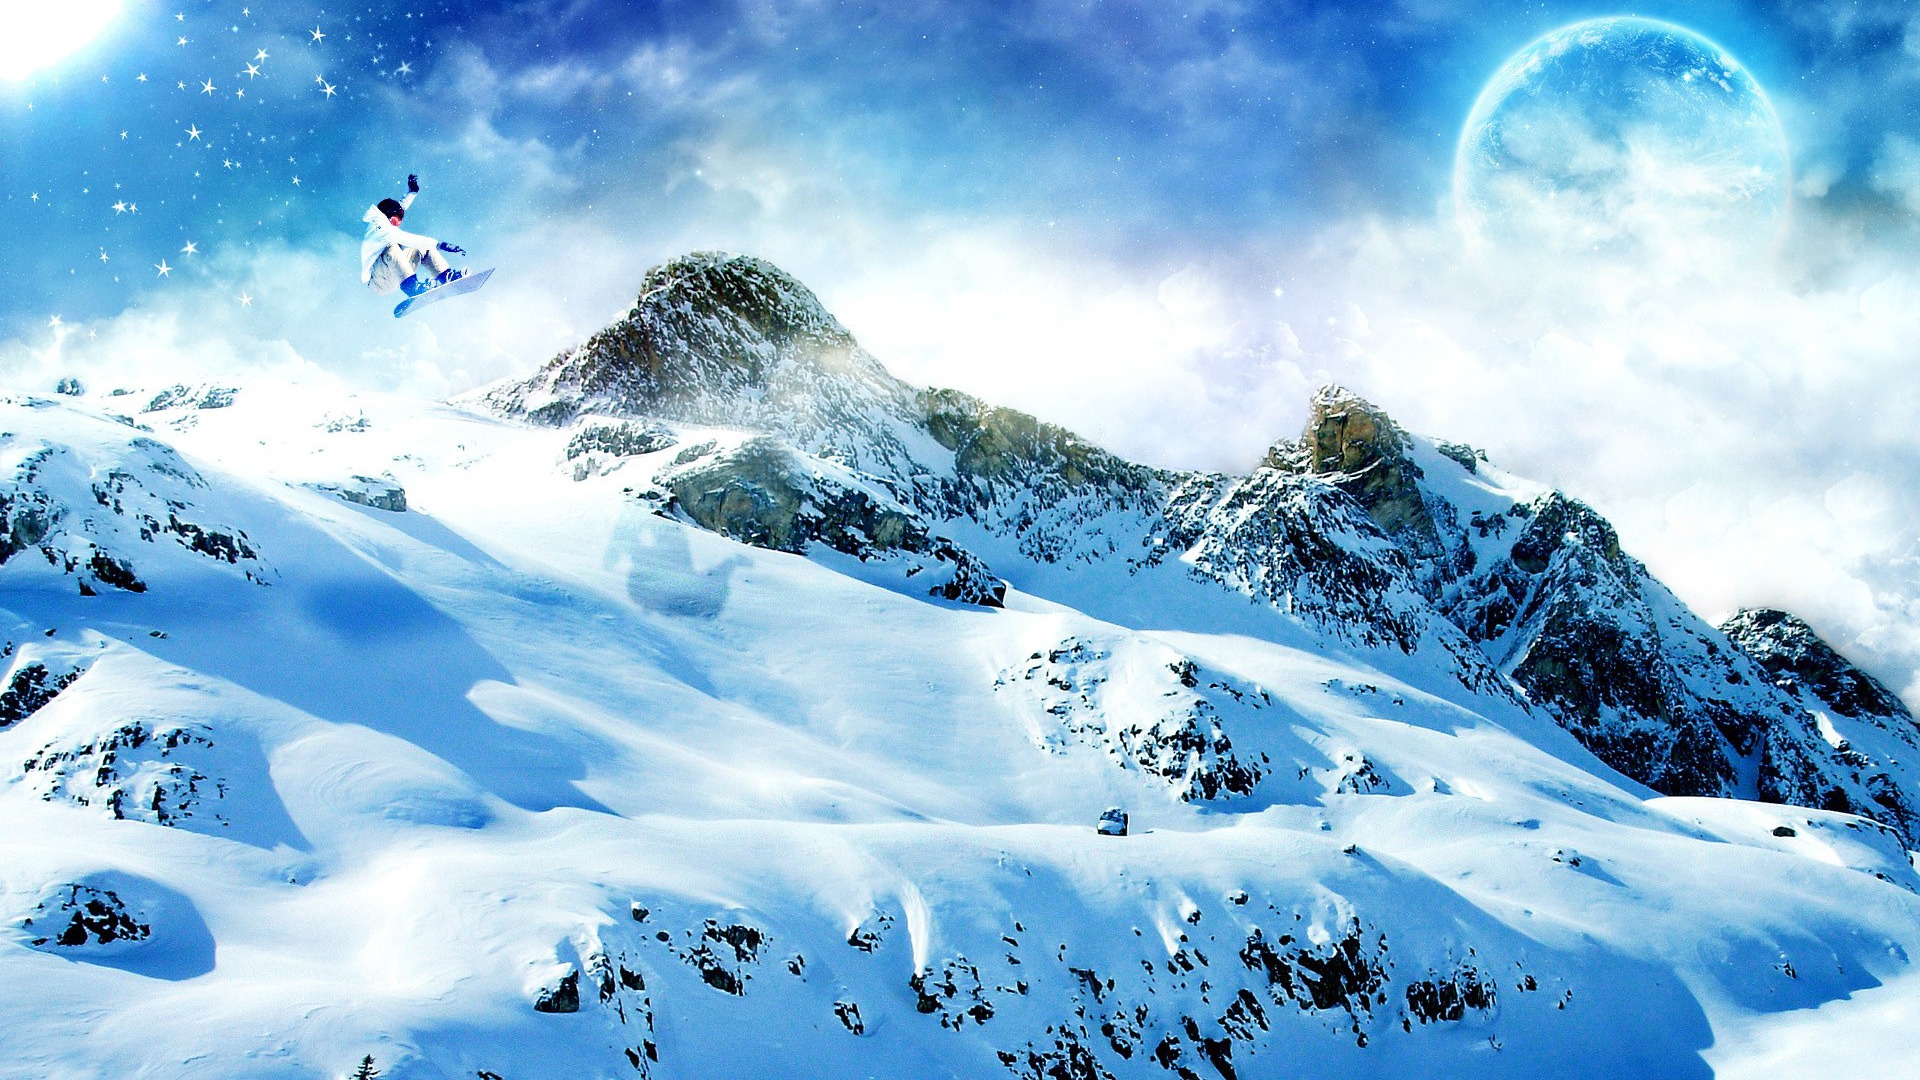 Download Planet over snowy mountains wallpaper 1920x1080